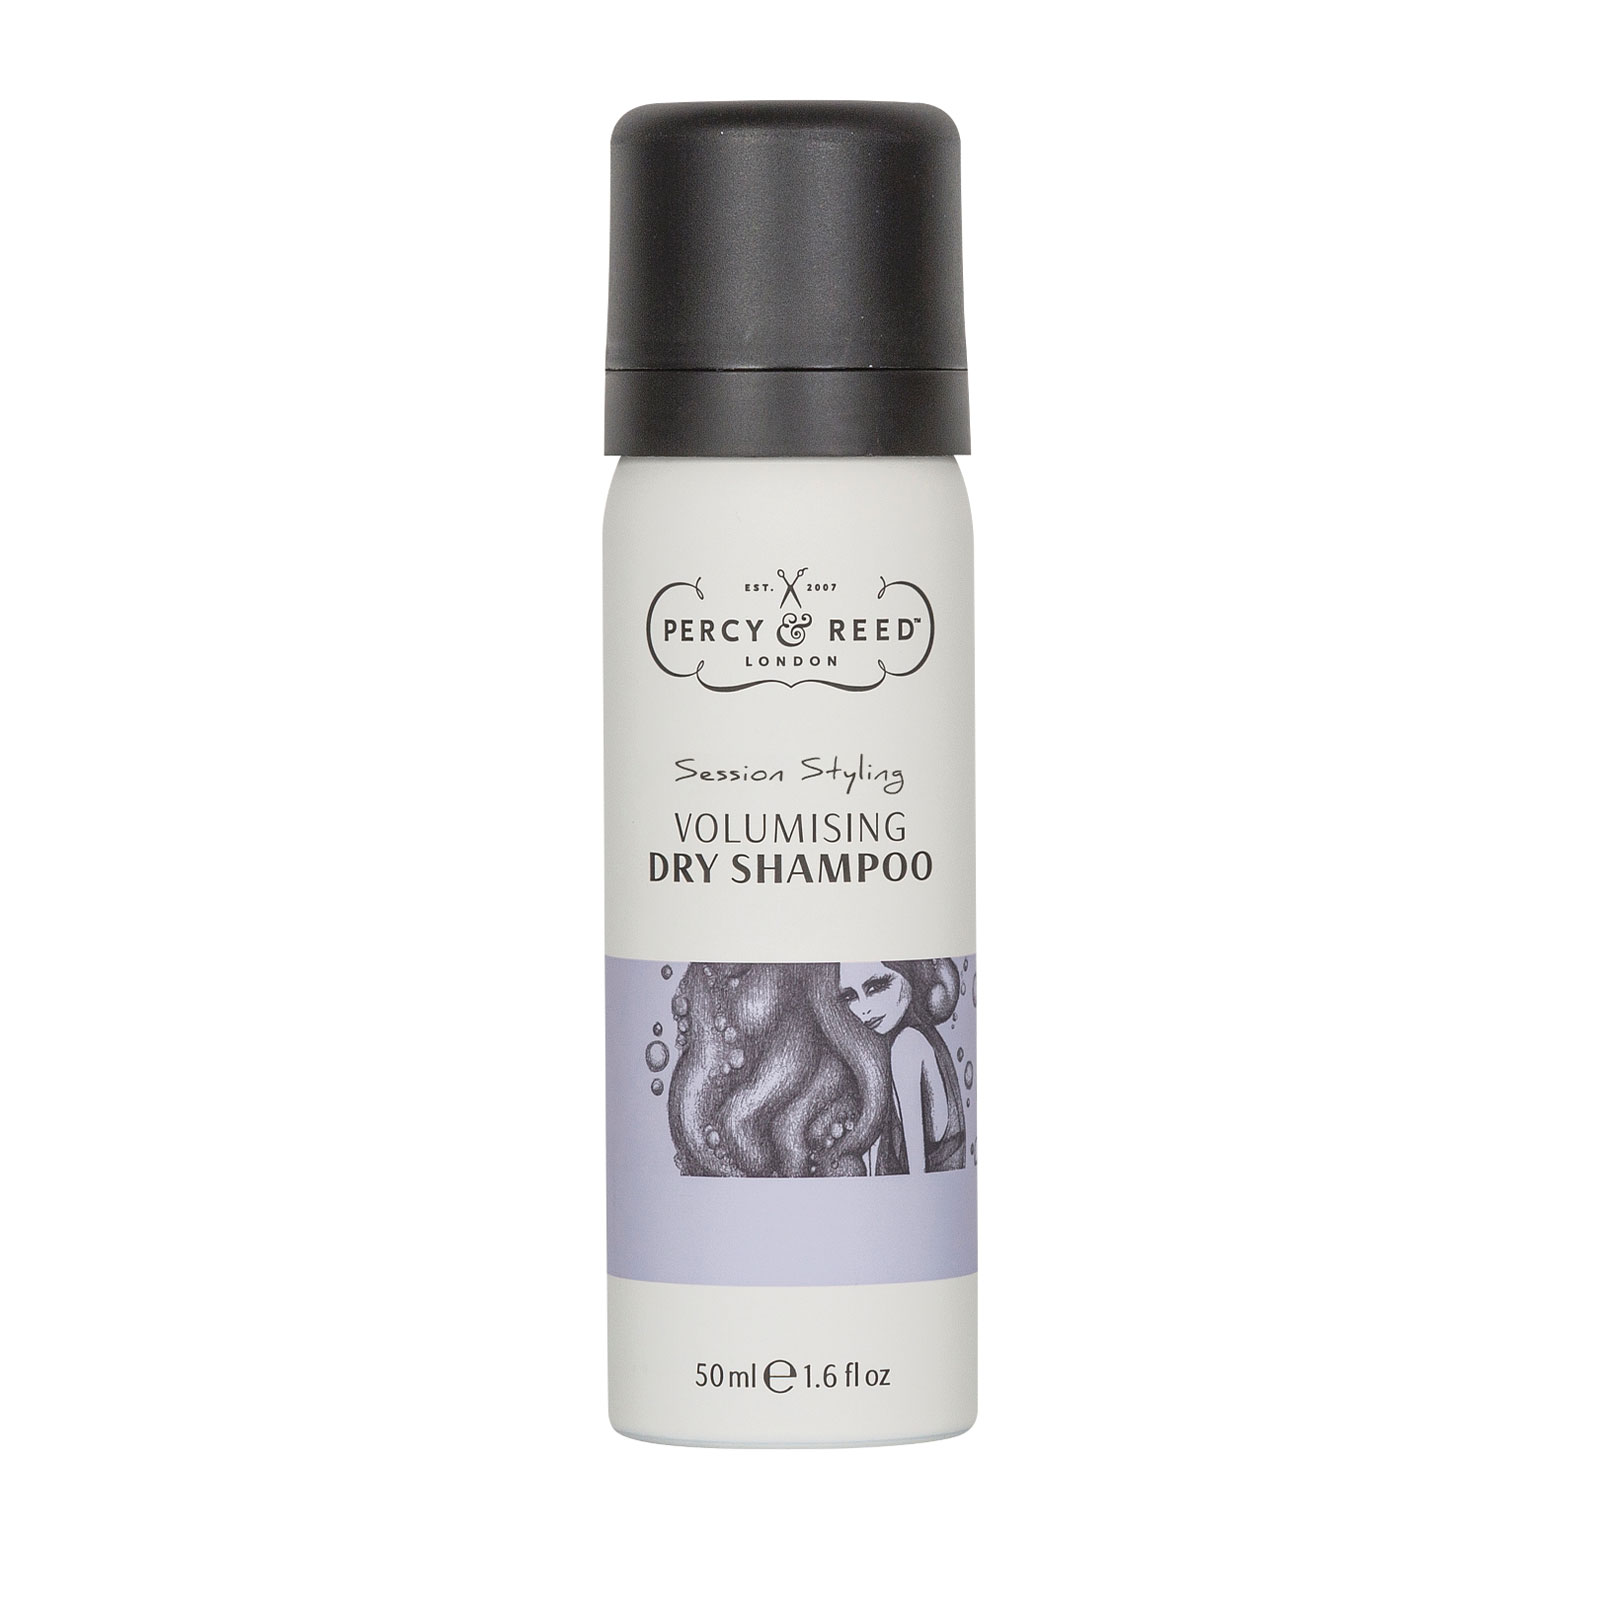 Percy & Reed Session Styling Volumising Dry Shampoo 50Ml